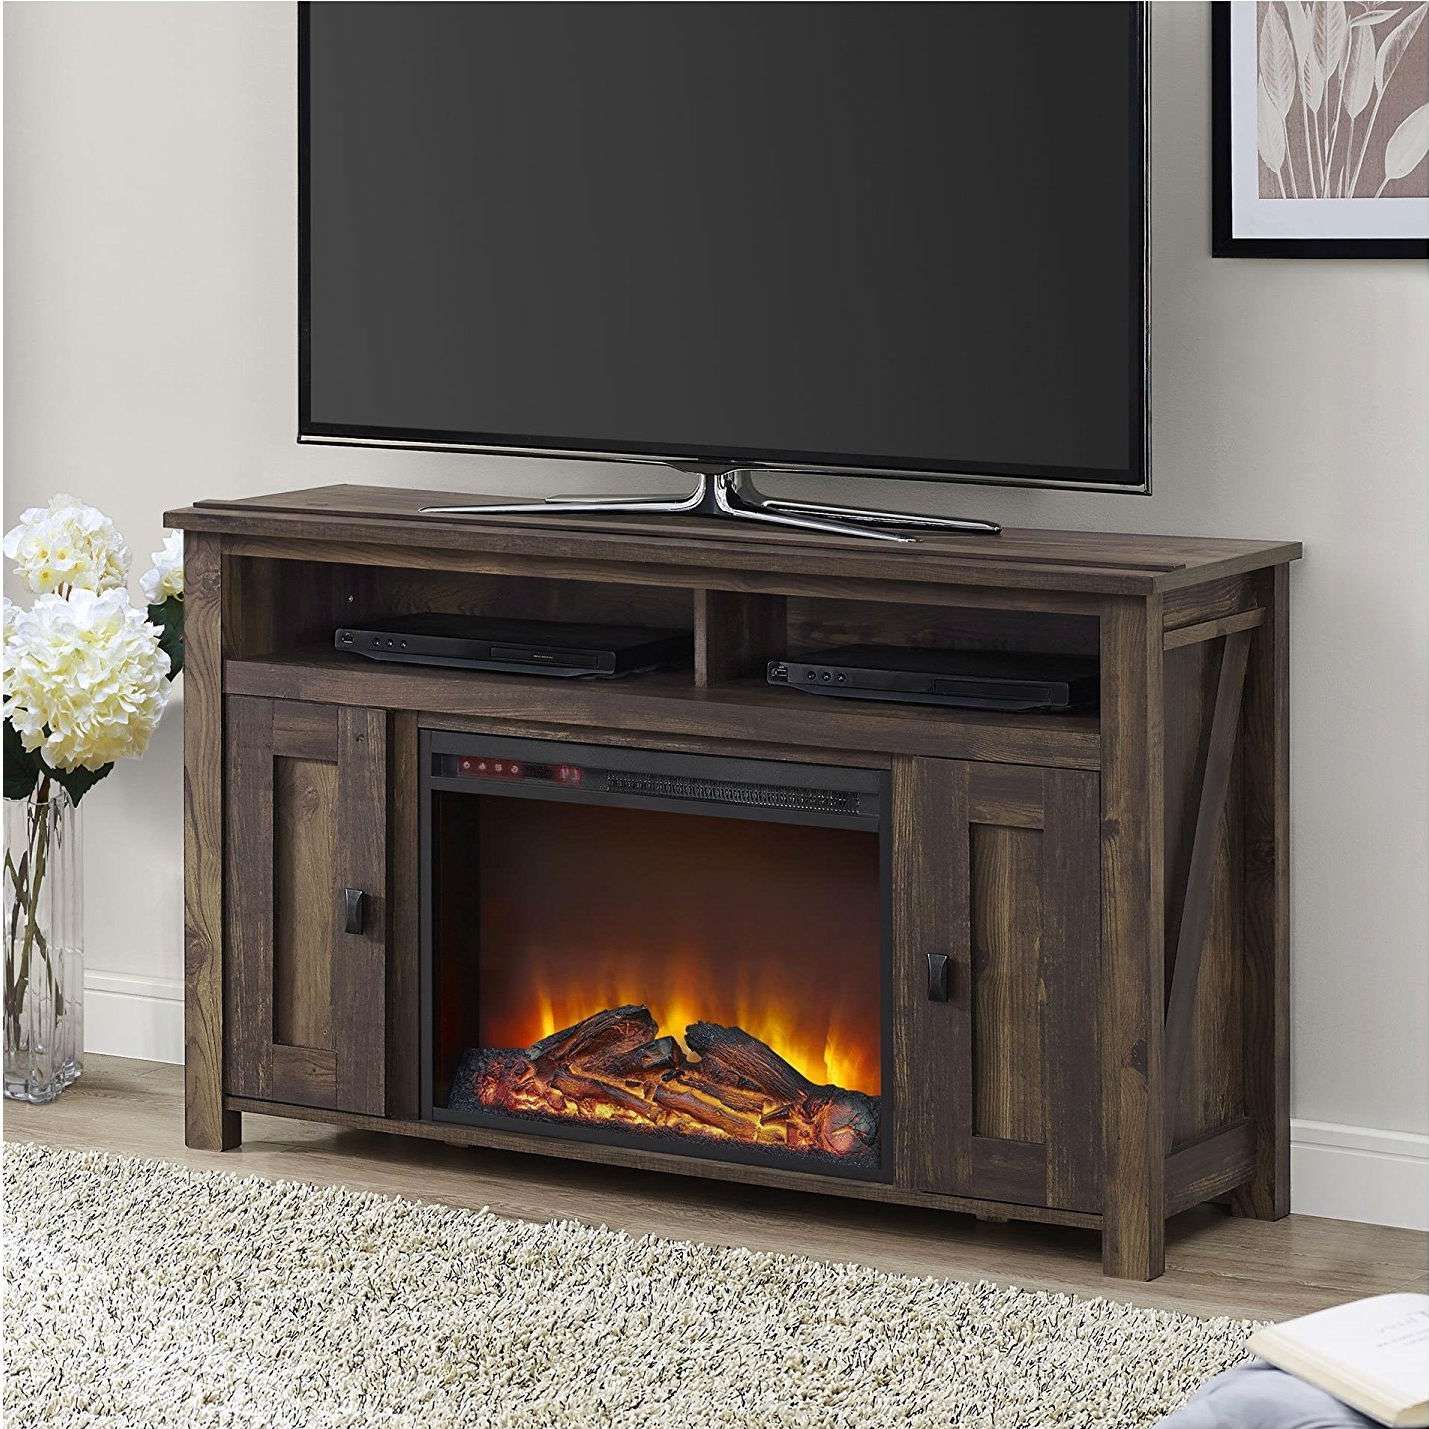 50 Inch Tv Stand In Medium Brown Wood With 1,500 Watt Within Wooden Tv Stands For 50 Inch Tv (View 1 of 15)